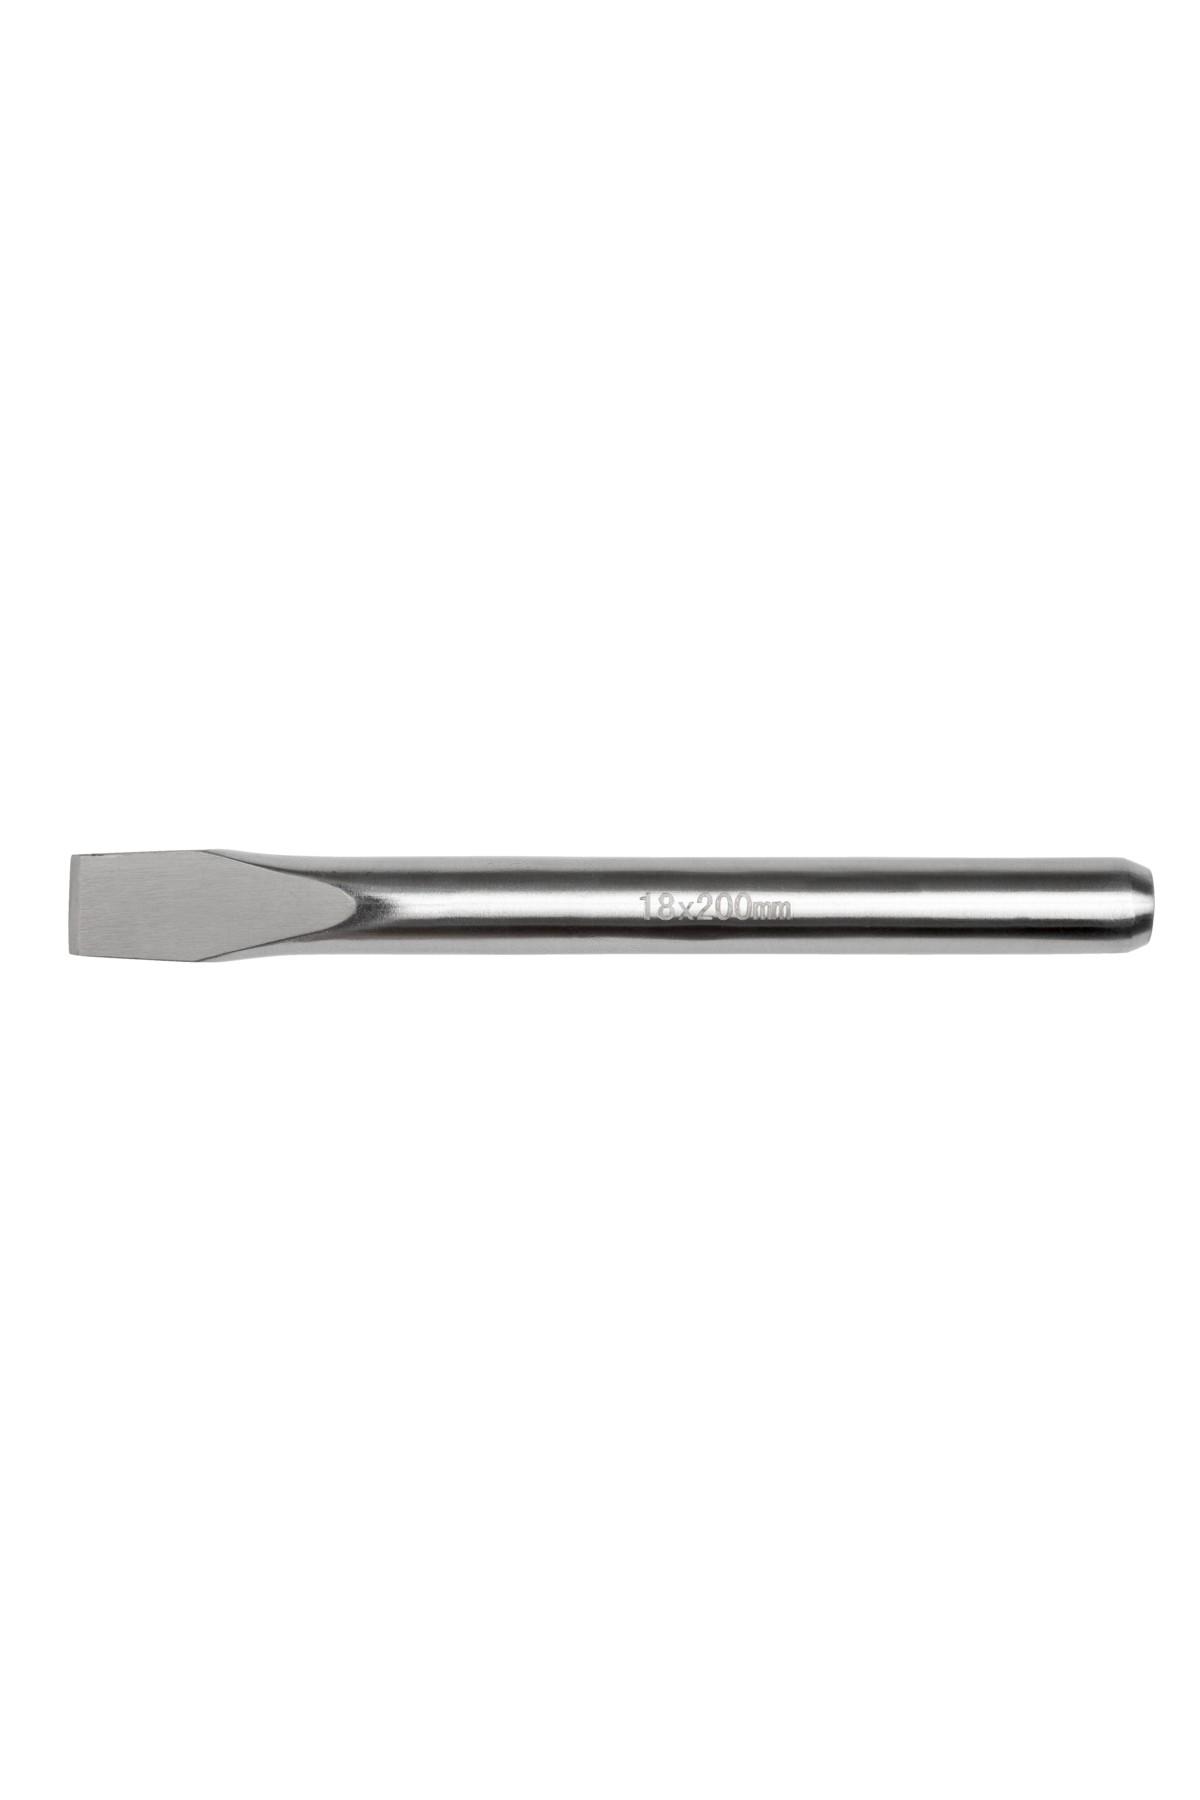 Flat chisel stainless 25-400mm